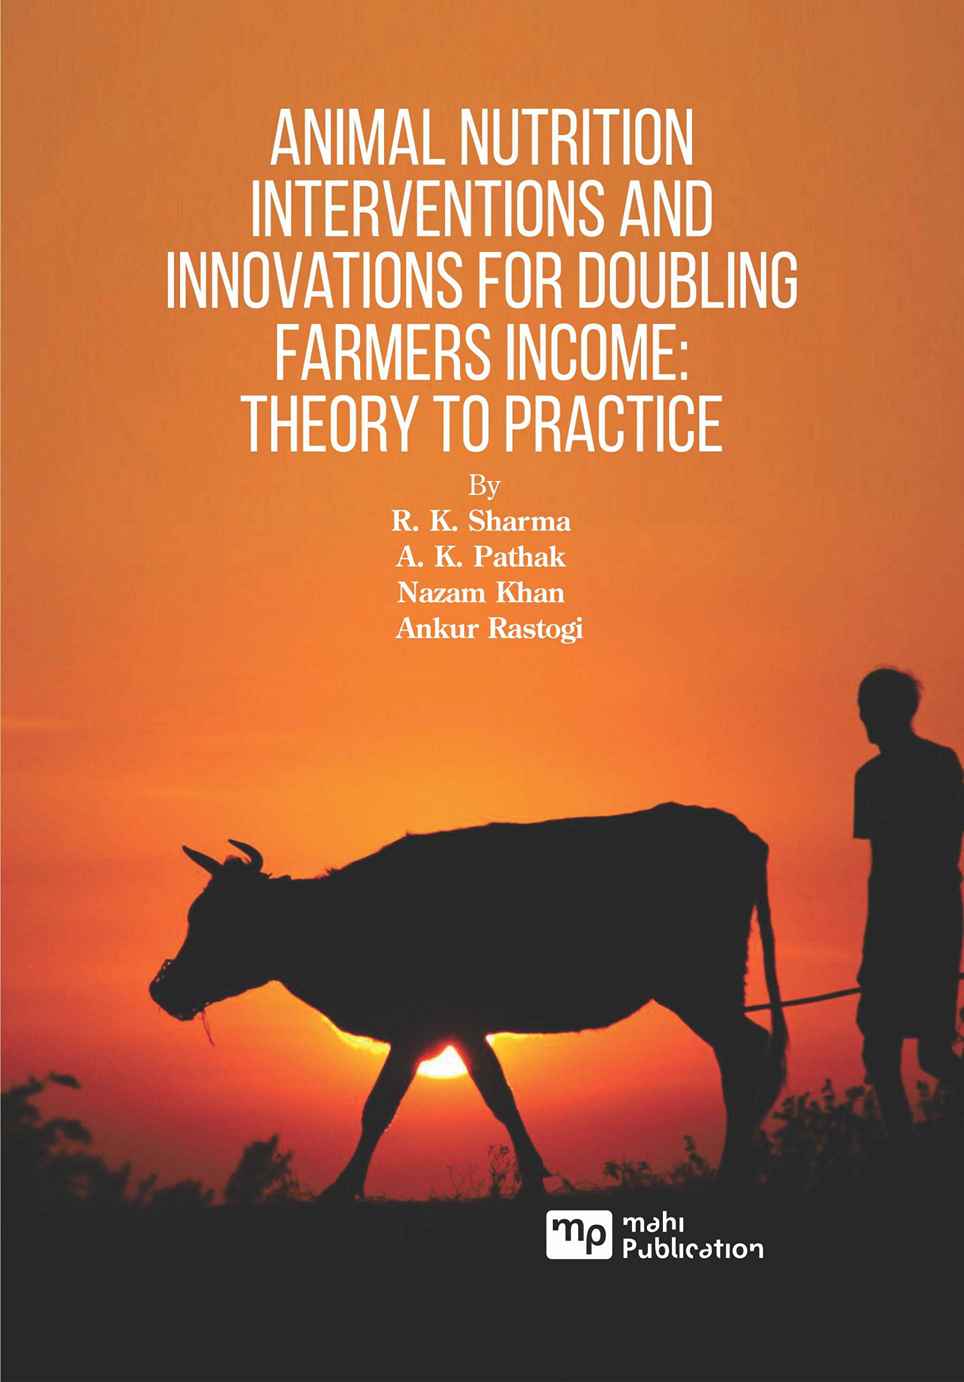 Animal Nutrition Interventions and Innovations for Doubling Farmers Income: Theory to Practice